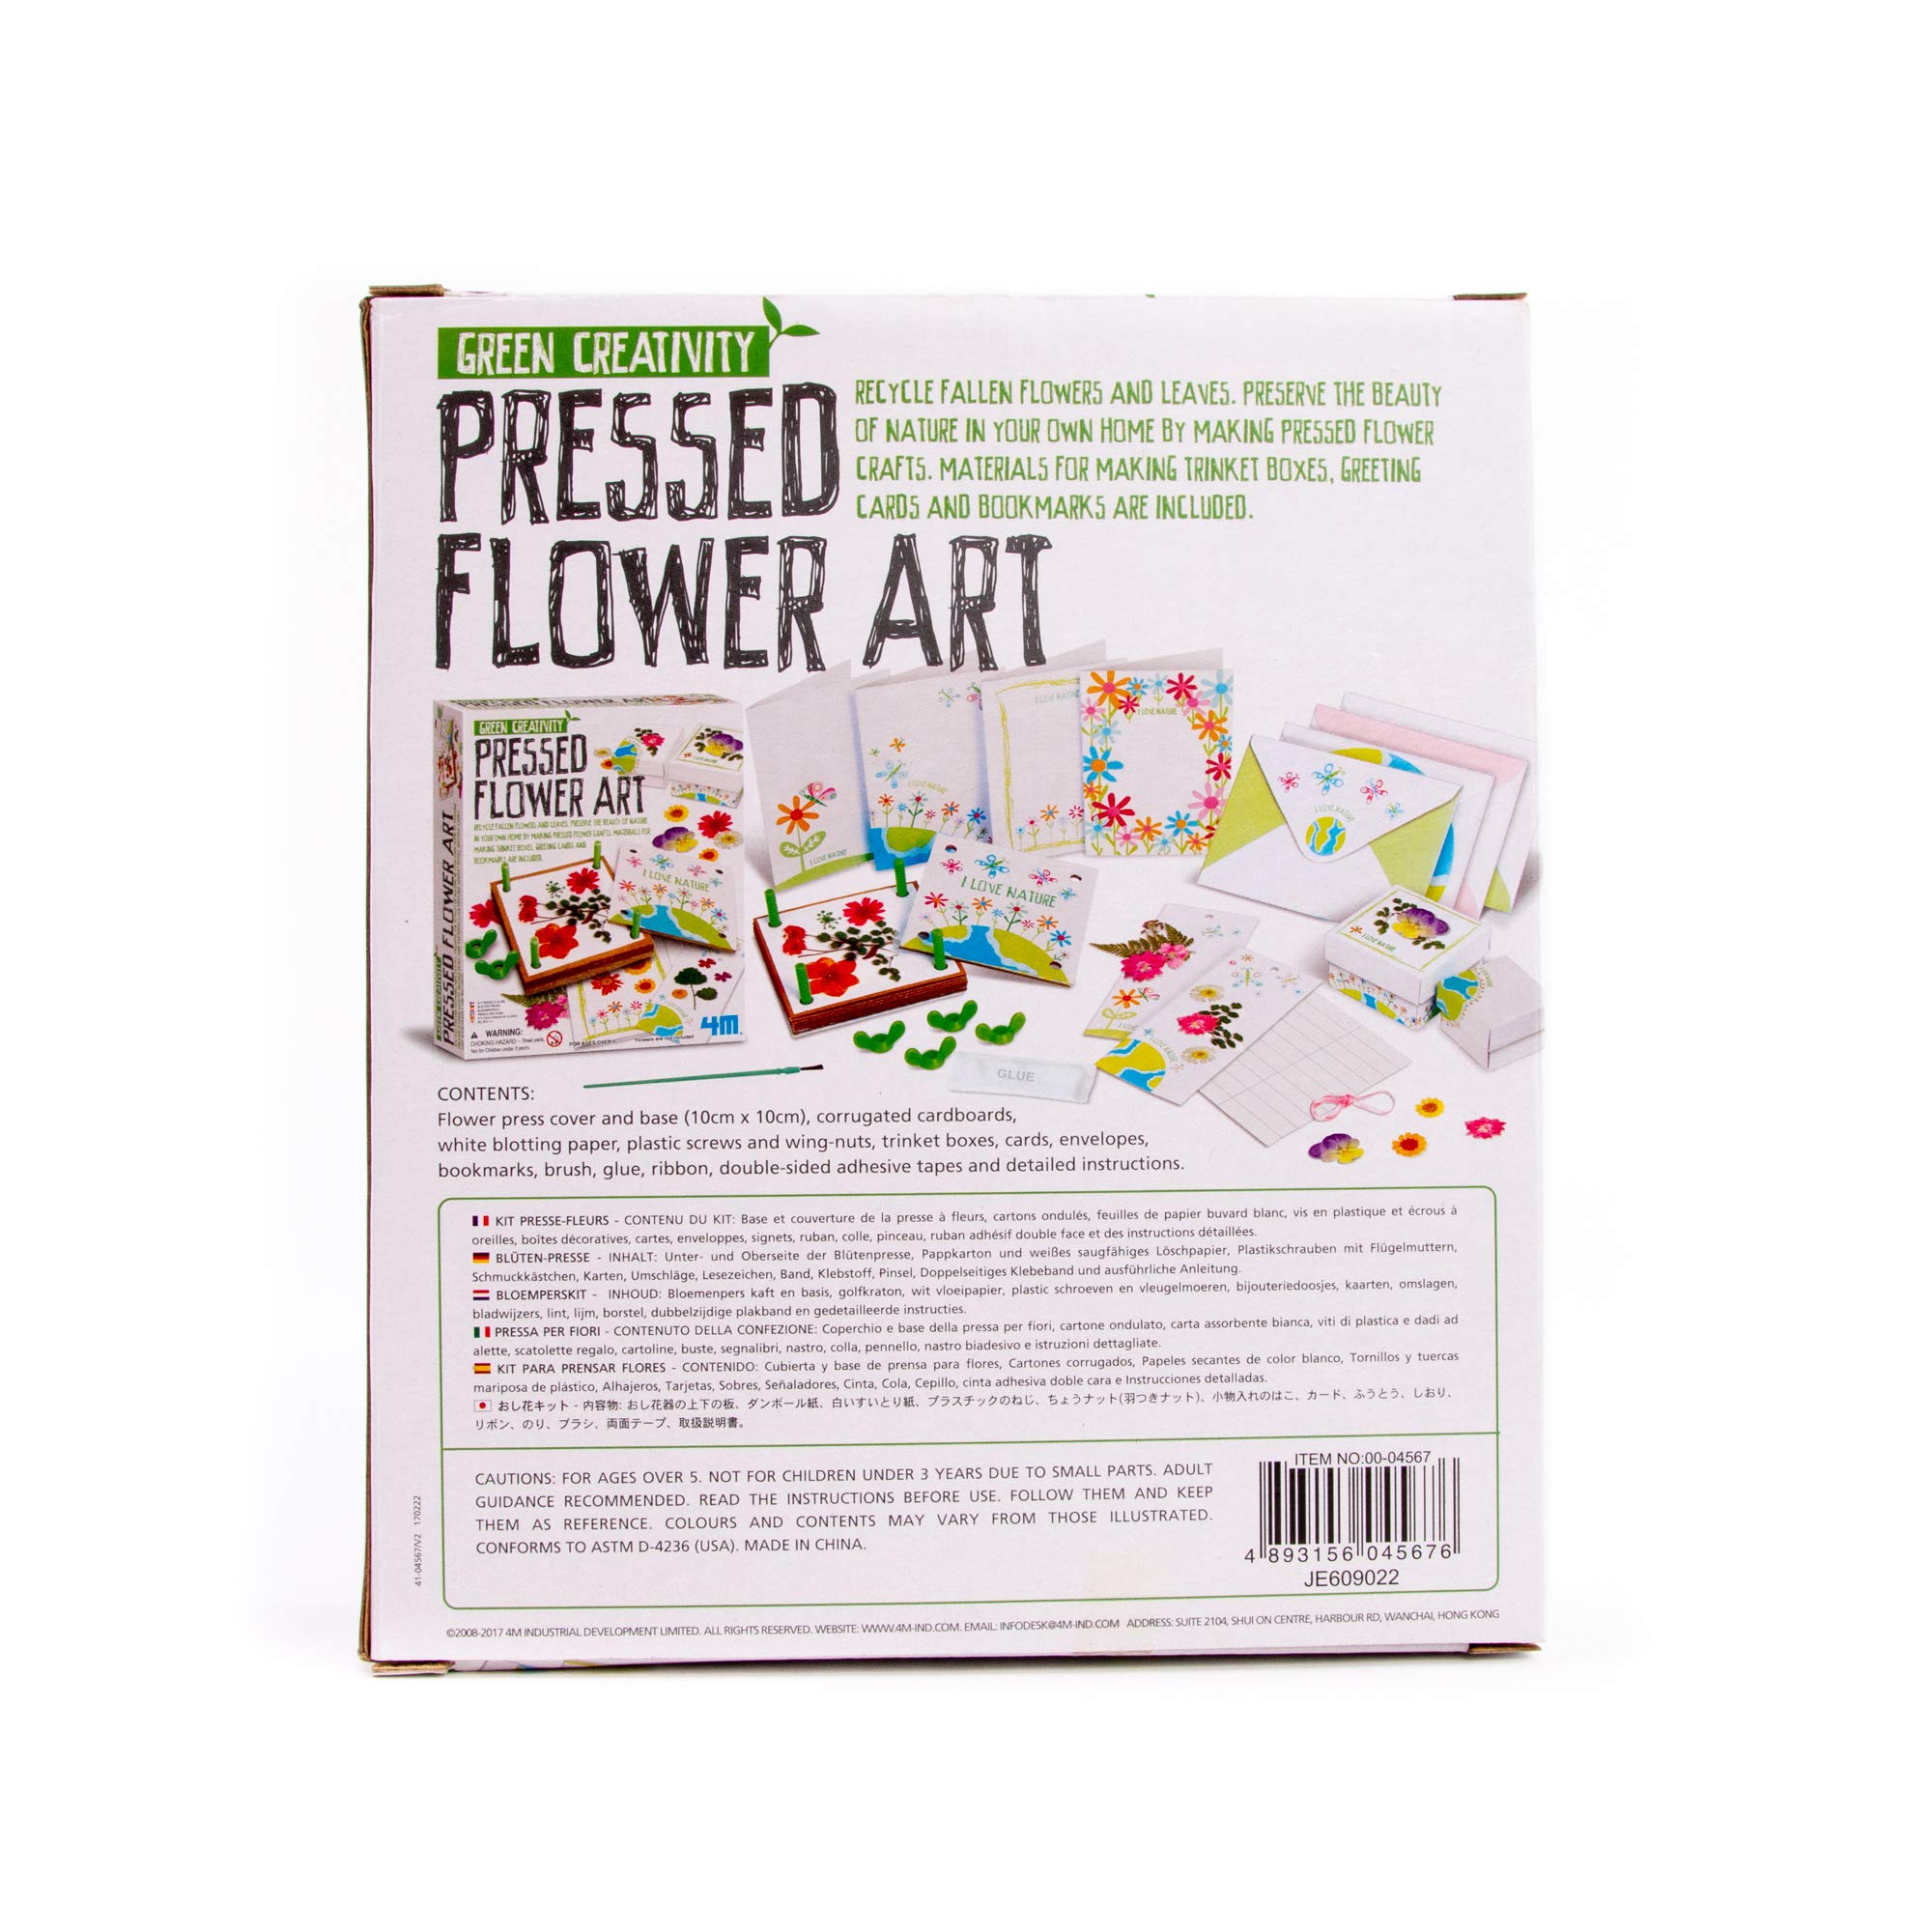 4M Green Creativity Pressed Flower Art Kit, Recycle Flowers Art & Crafts DIY Kit, For Boys & Girls Ages 5+